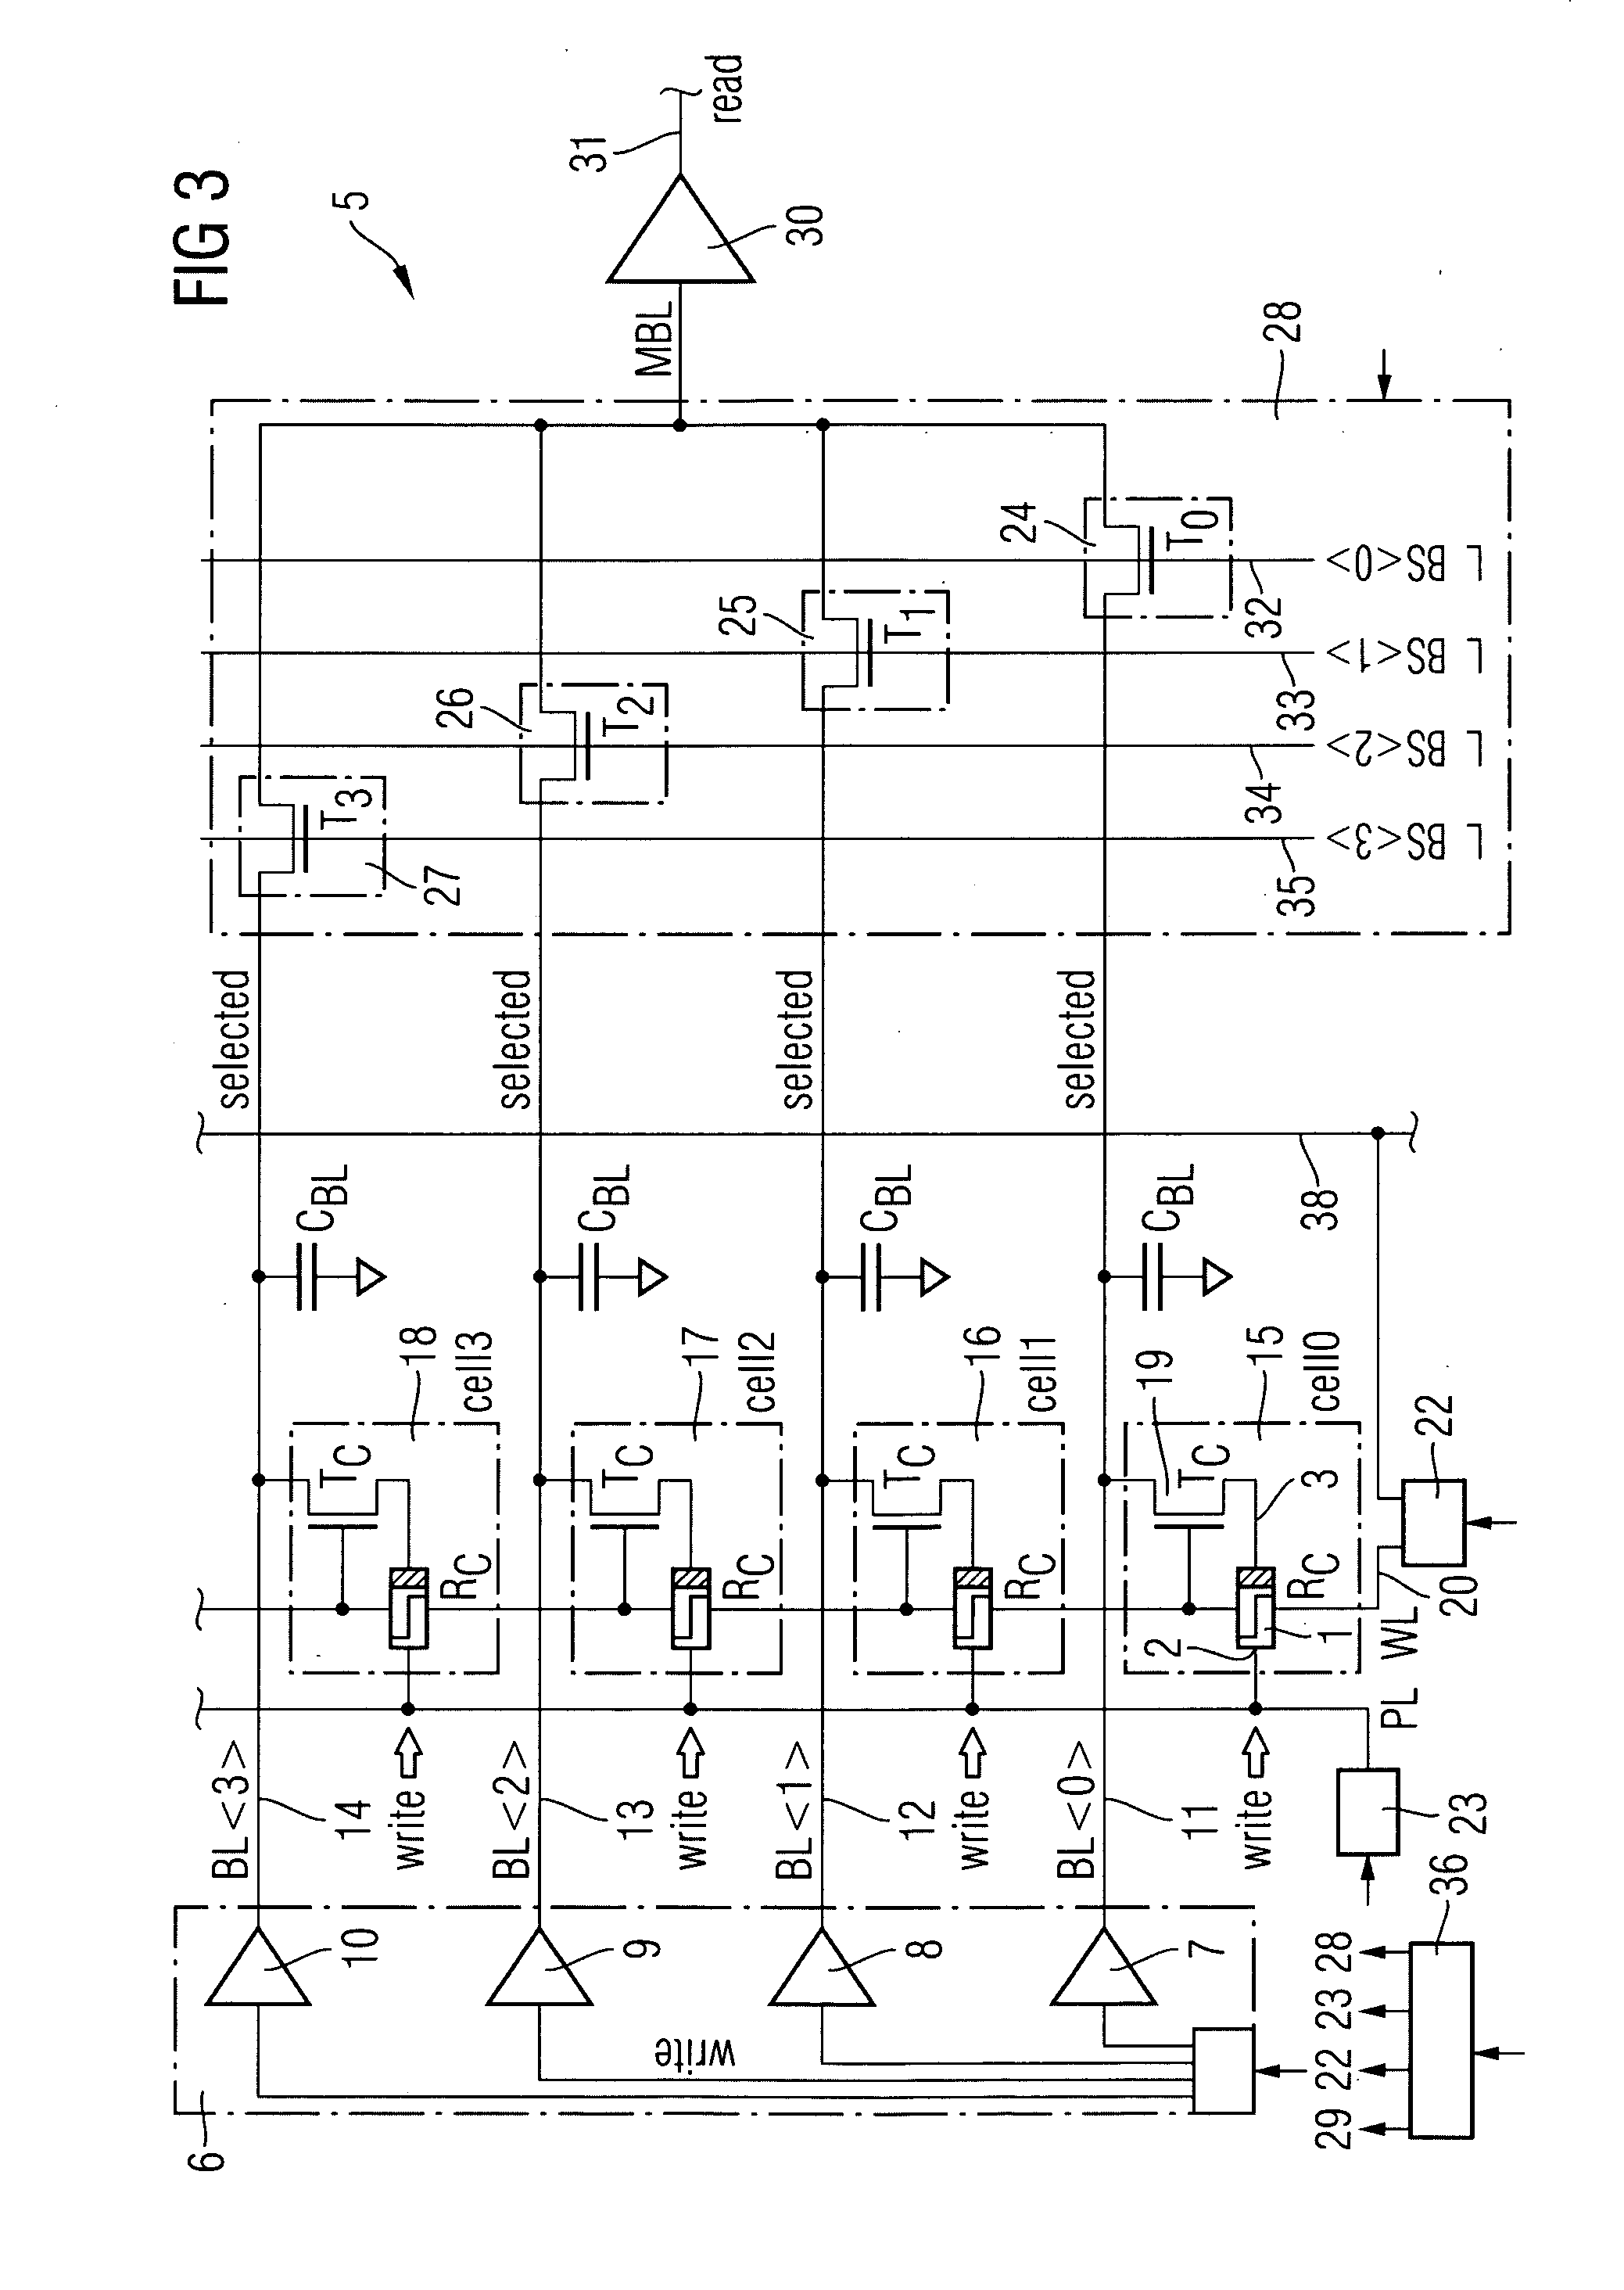 Method for writing data into a memory cell of a conductive bridging random access memory, memory circuit and CBRAM memory circuit